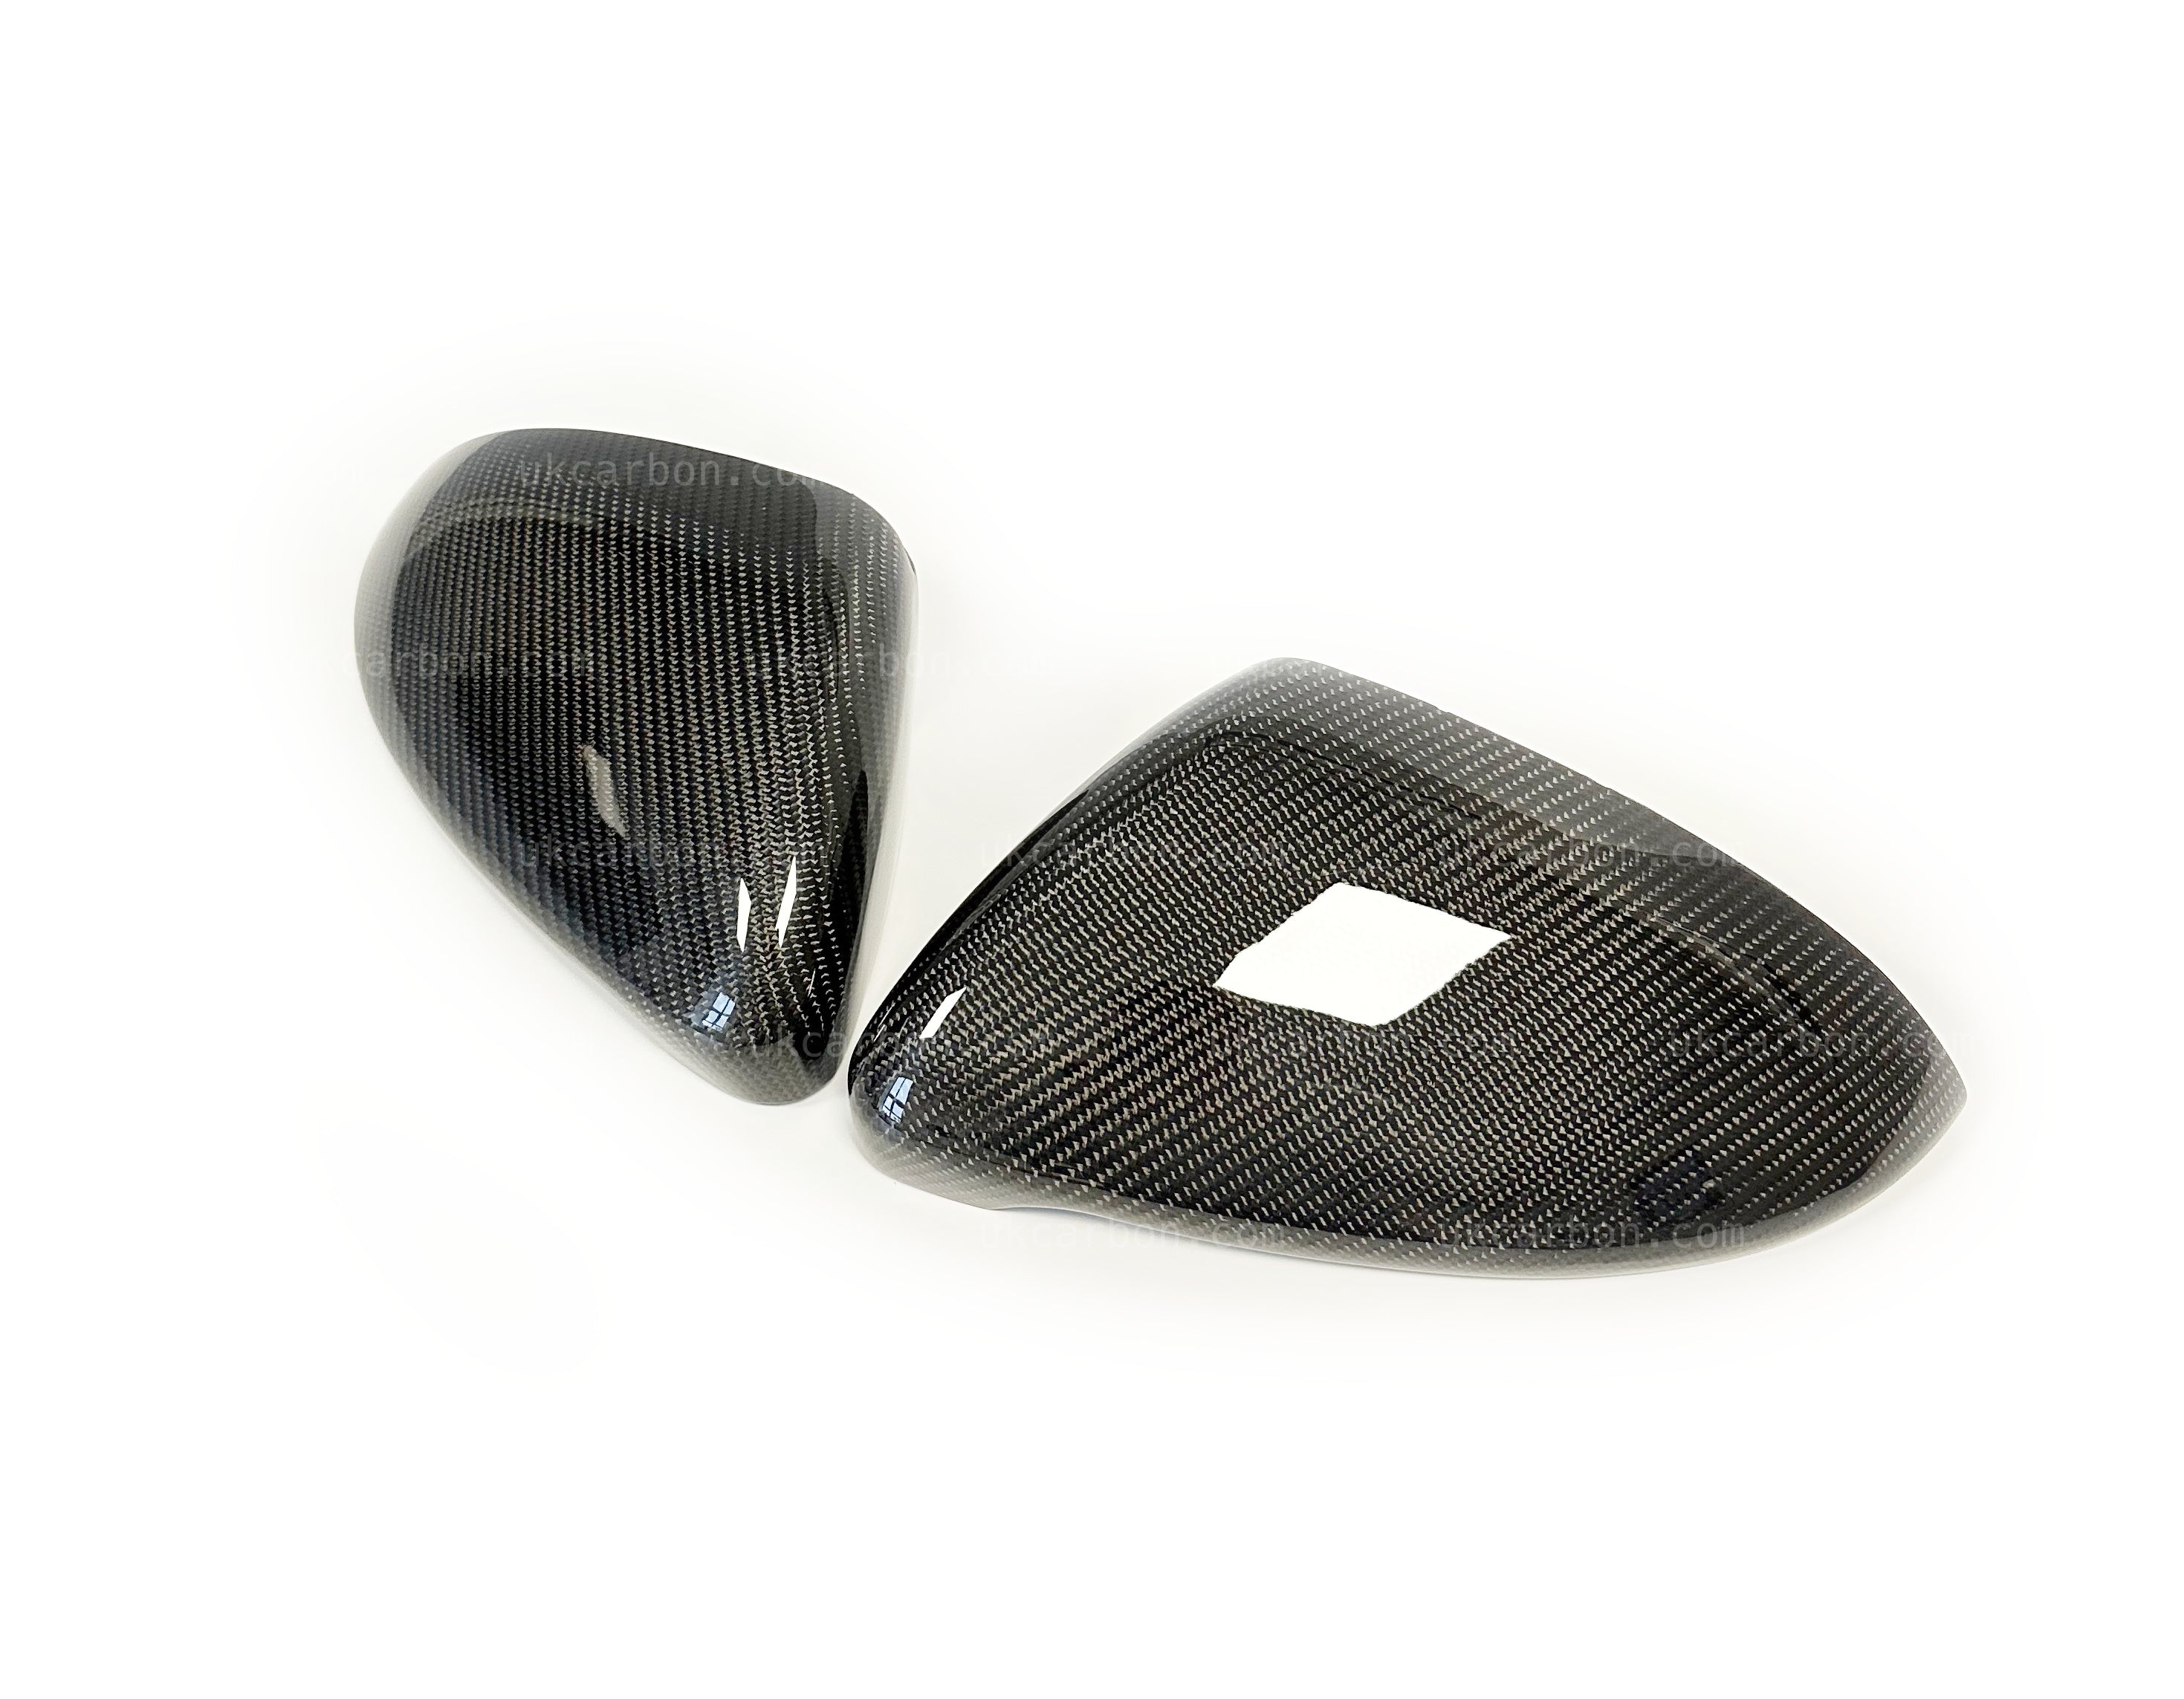 Volkswagen Golf GTI R Carbon Fibre Wing Mirror Cover VW MK7.5 by UKCarbon